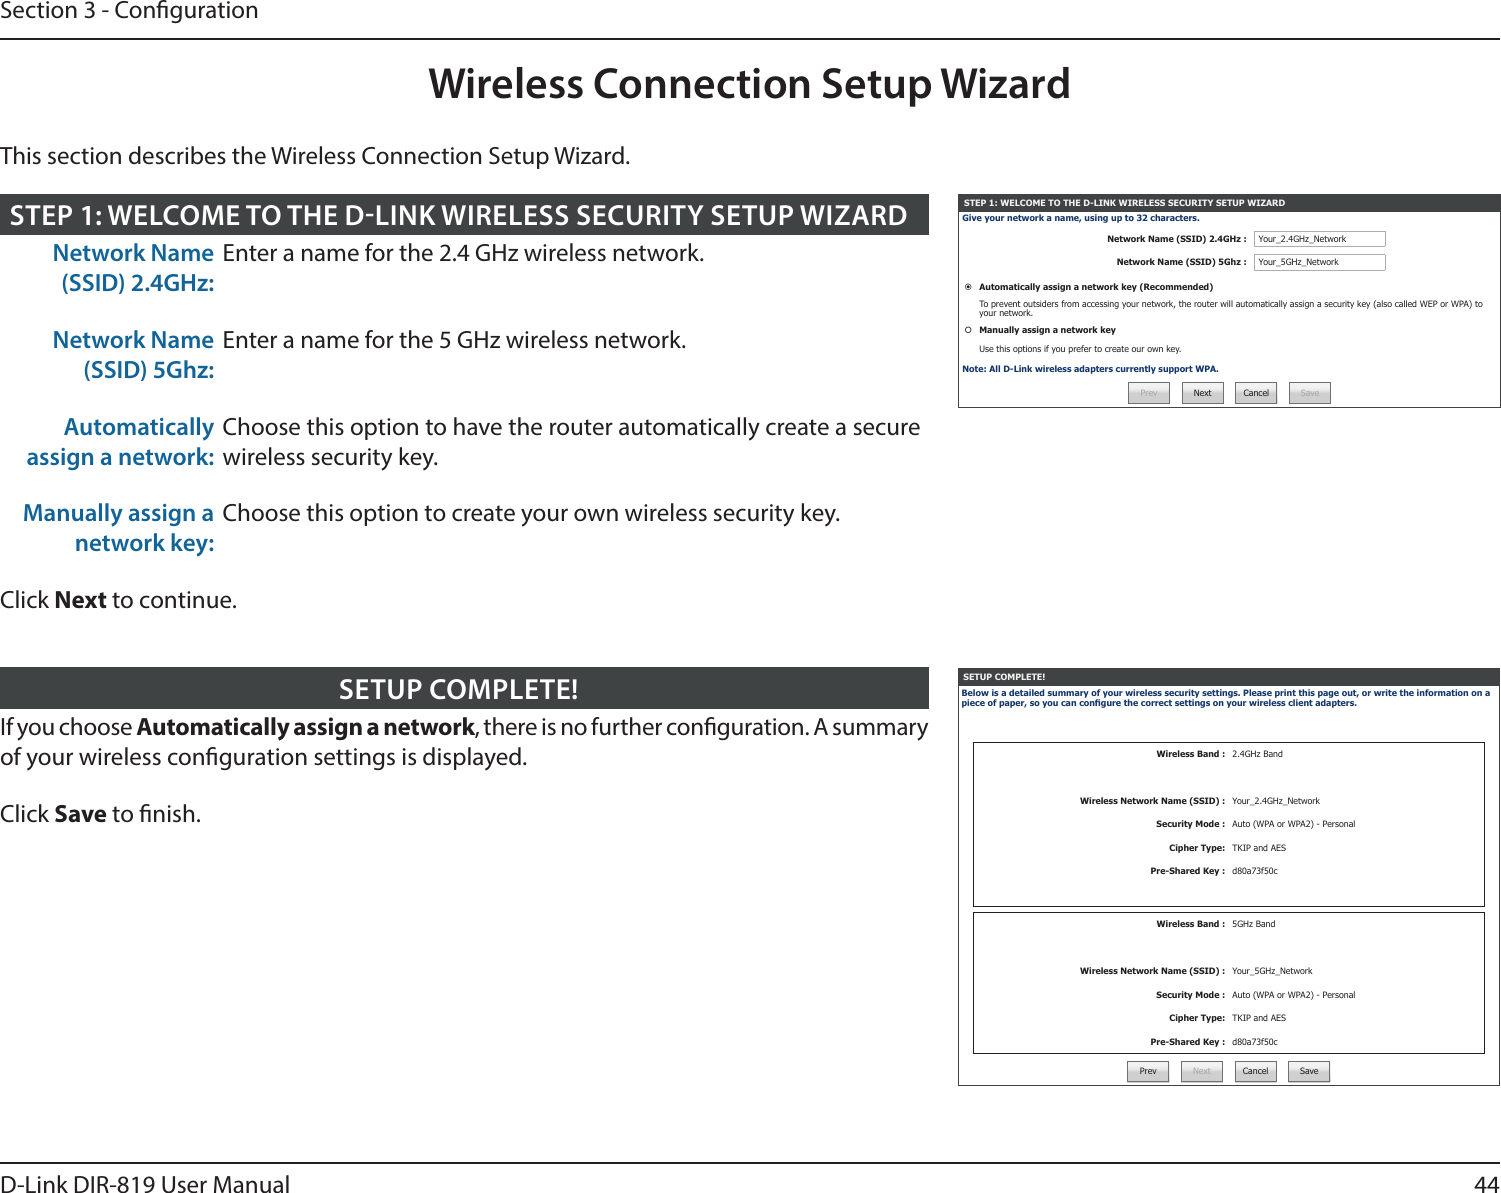 44D-Link DIR-819 User ManualSection 3 - CongurationWireless Connection Setup WizardSETUP COMPLETE!Below is a detailed summary of your wireless security settings. Please print this page out, or write the information on a piece of paper, so you can congure the correct settings on your wireless client adapters.Wireless Band : 2.4GHz BandWireless Network Name (SSID) : Your_2.4GHz_NetworkSecurity Mode : Auto (WPA or WPA2) - PersonalCipher Type: TKIP and AESPre-Shared Key : d80a73f50cWireless Band : 5GHz BandWireless Network Name (SSID) : Your_5GHz_NetworkSecurity Mode : Auto (WPA or WPA2) - PersonalCipher Type: TKIP and AESPre-Shared Key : d80a73f50cPrev Next Cancel SaveIf you choose Automatically assign a network, there is no further conguration. A summary of your wireless conguration settings is displayed.Click Save to nish.SETUP COMPLETE!STEP 1: WELCOME TO THE D-LINK WIRELESS SECURITY SETUP WIZARDGive your network a name, using up to 32 characters.Network Name (SSID) 2.4GHz : Your_2.4GHz_NetworkNetwork Name (SSID) 5Ghz : Your_5GHz_NetworkAutomatically assign a network key (Recommended)To prevent outsiders from accessing your network, the router will automatically assign a security key (also called WEP or WPA) to your network.Manually assign a network keyUse this options if you prefer to create our own key.Note: All D-Link wireless adapters currently support WPA.Prev Next Cancel SaveNetwork Name (SSID) 2.4GHz:Enter a name for the 2.4 GHz wireless network.Network Name (SSID) 5Ghz:Enter a name for the 5 GHz wireless network.Automatically assign a network:Choose this option to have the router automatically create a secure wireless security key.Manually assign a network key:Choose this option to create your own wireless security key.Click Next to continue.STEP 1: WELCOME TO THE DLINK WIRELESS SECURITY SETUP WIZARDThis section describes the Wireless Connection Setup Wizard.